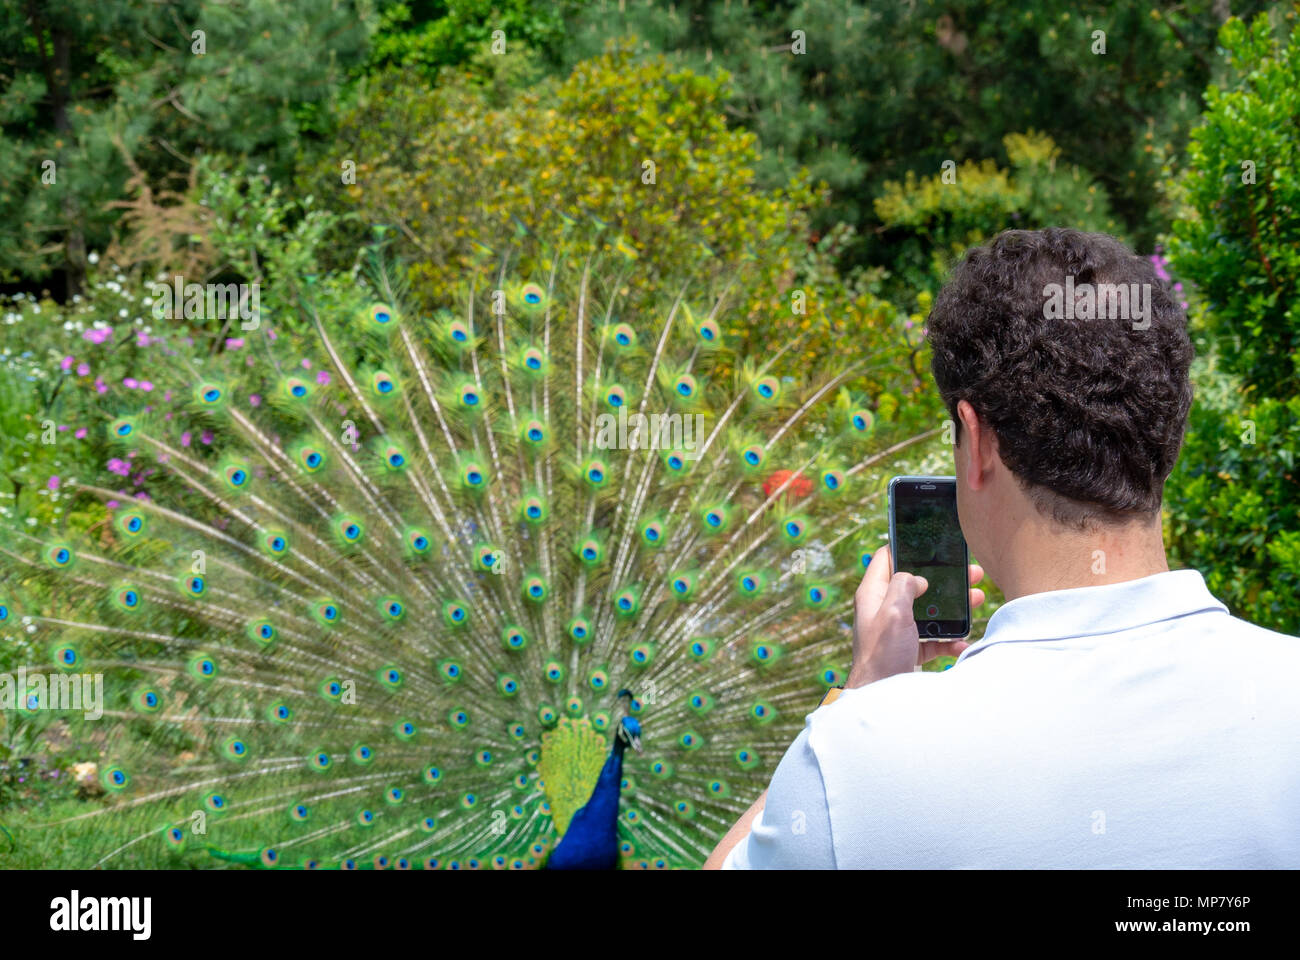 Bagatelle Park, Paris, France, Caucasian taking a photo of a peacock with his mobile phone, Stock Photo